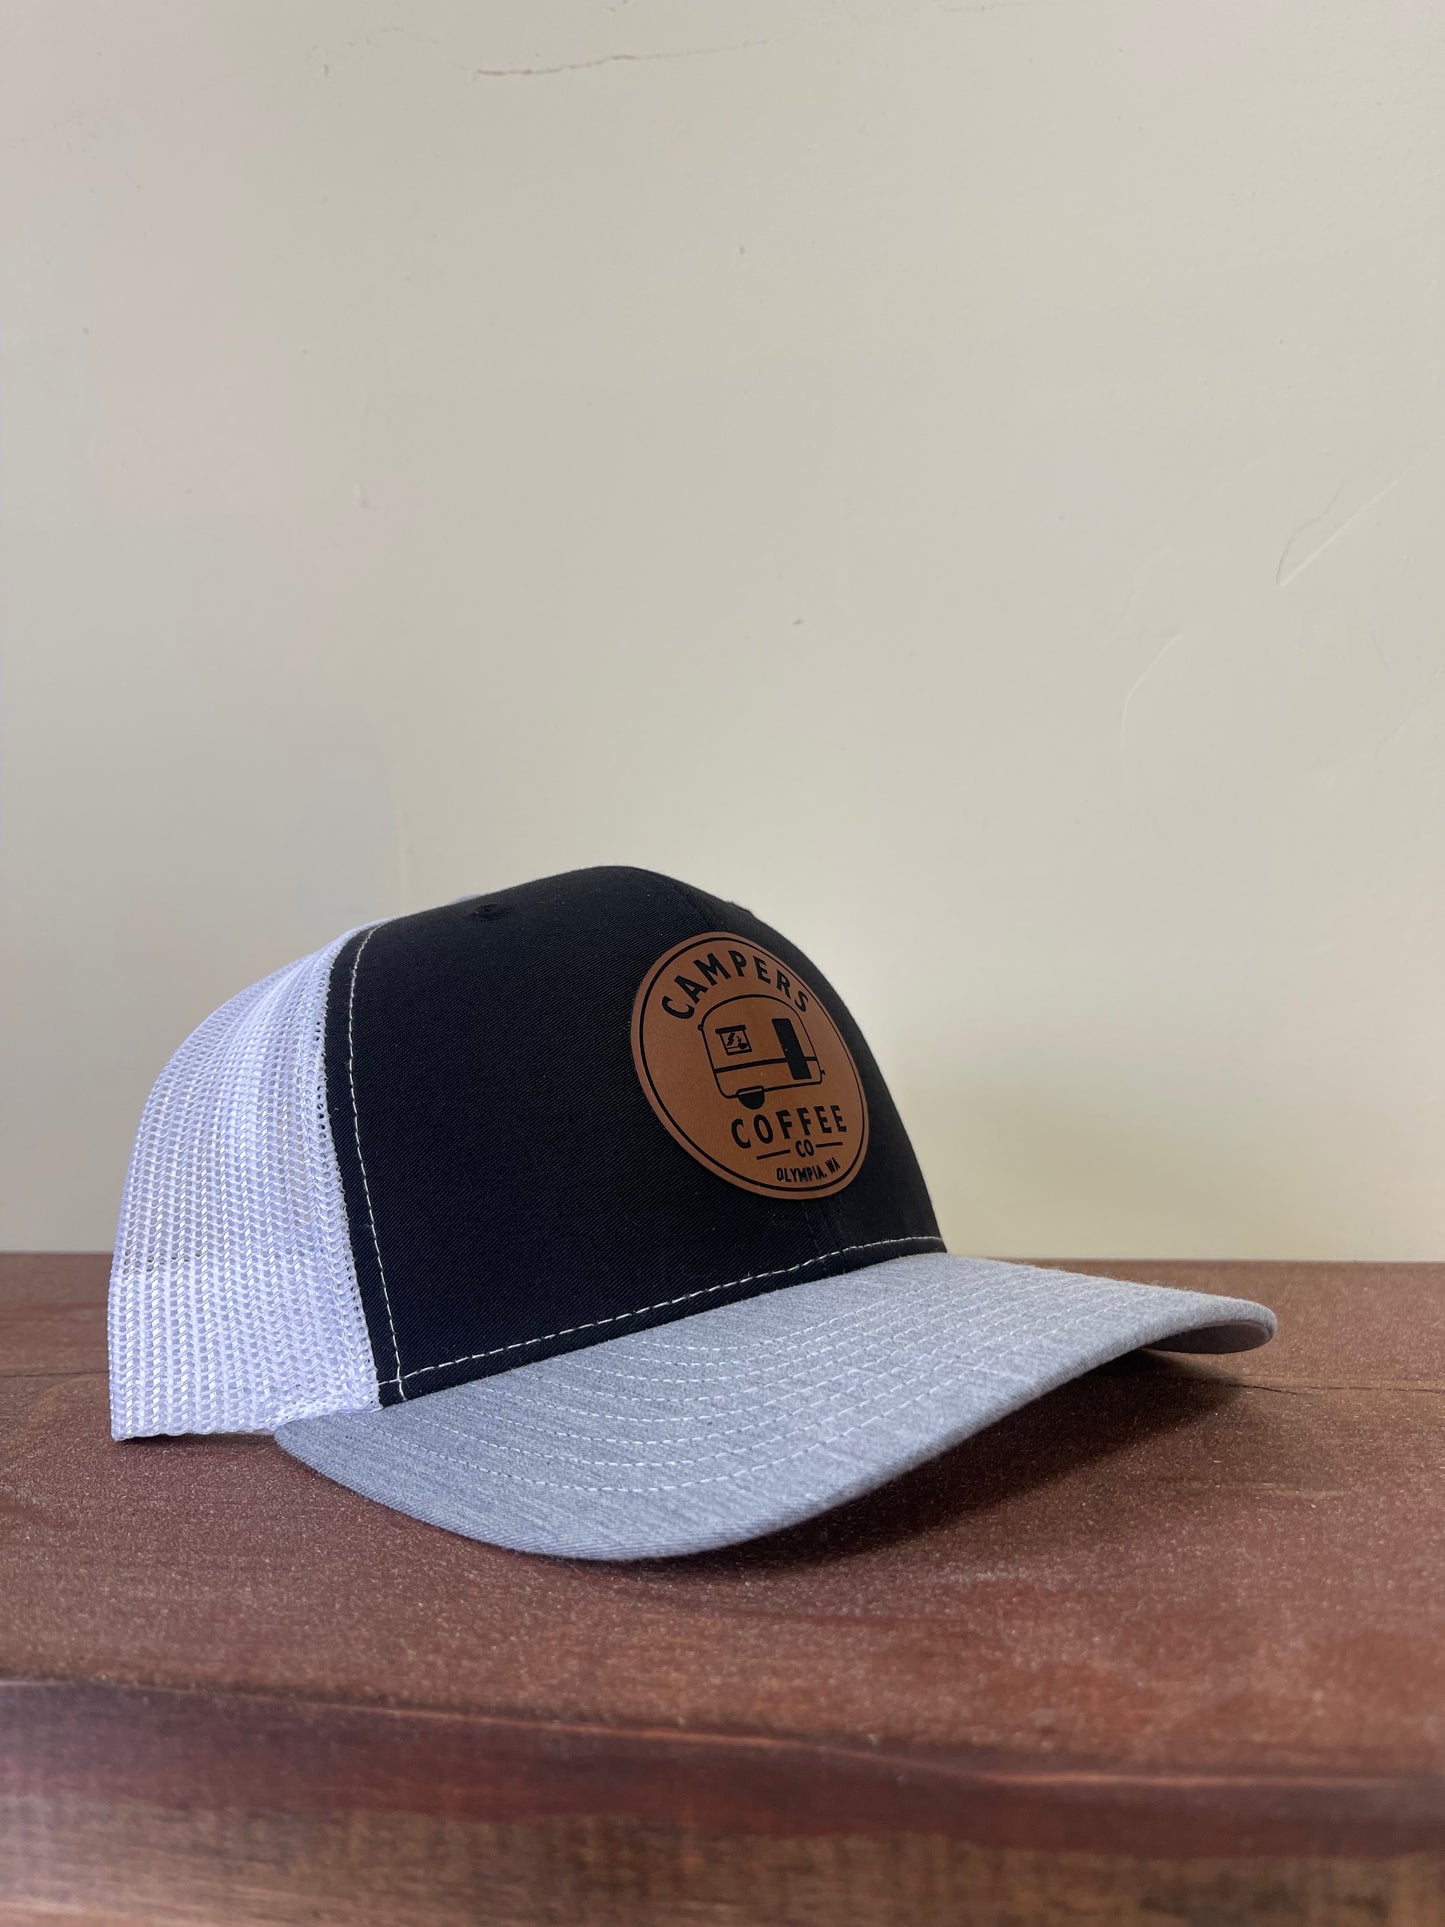 Campers Coffee Trucker Cap Black White and Grey